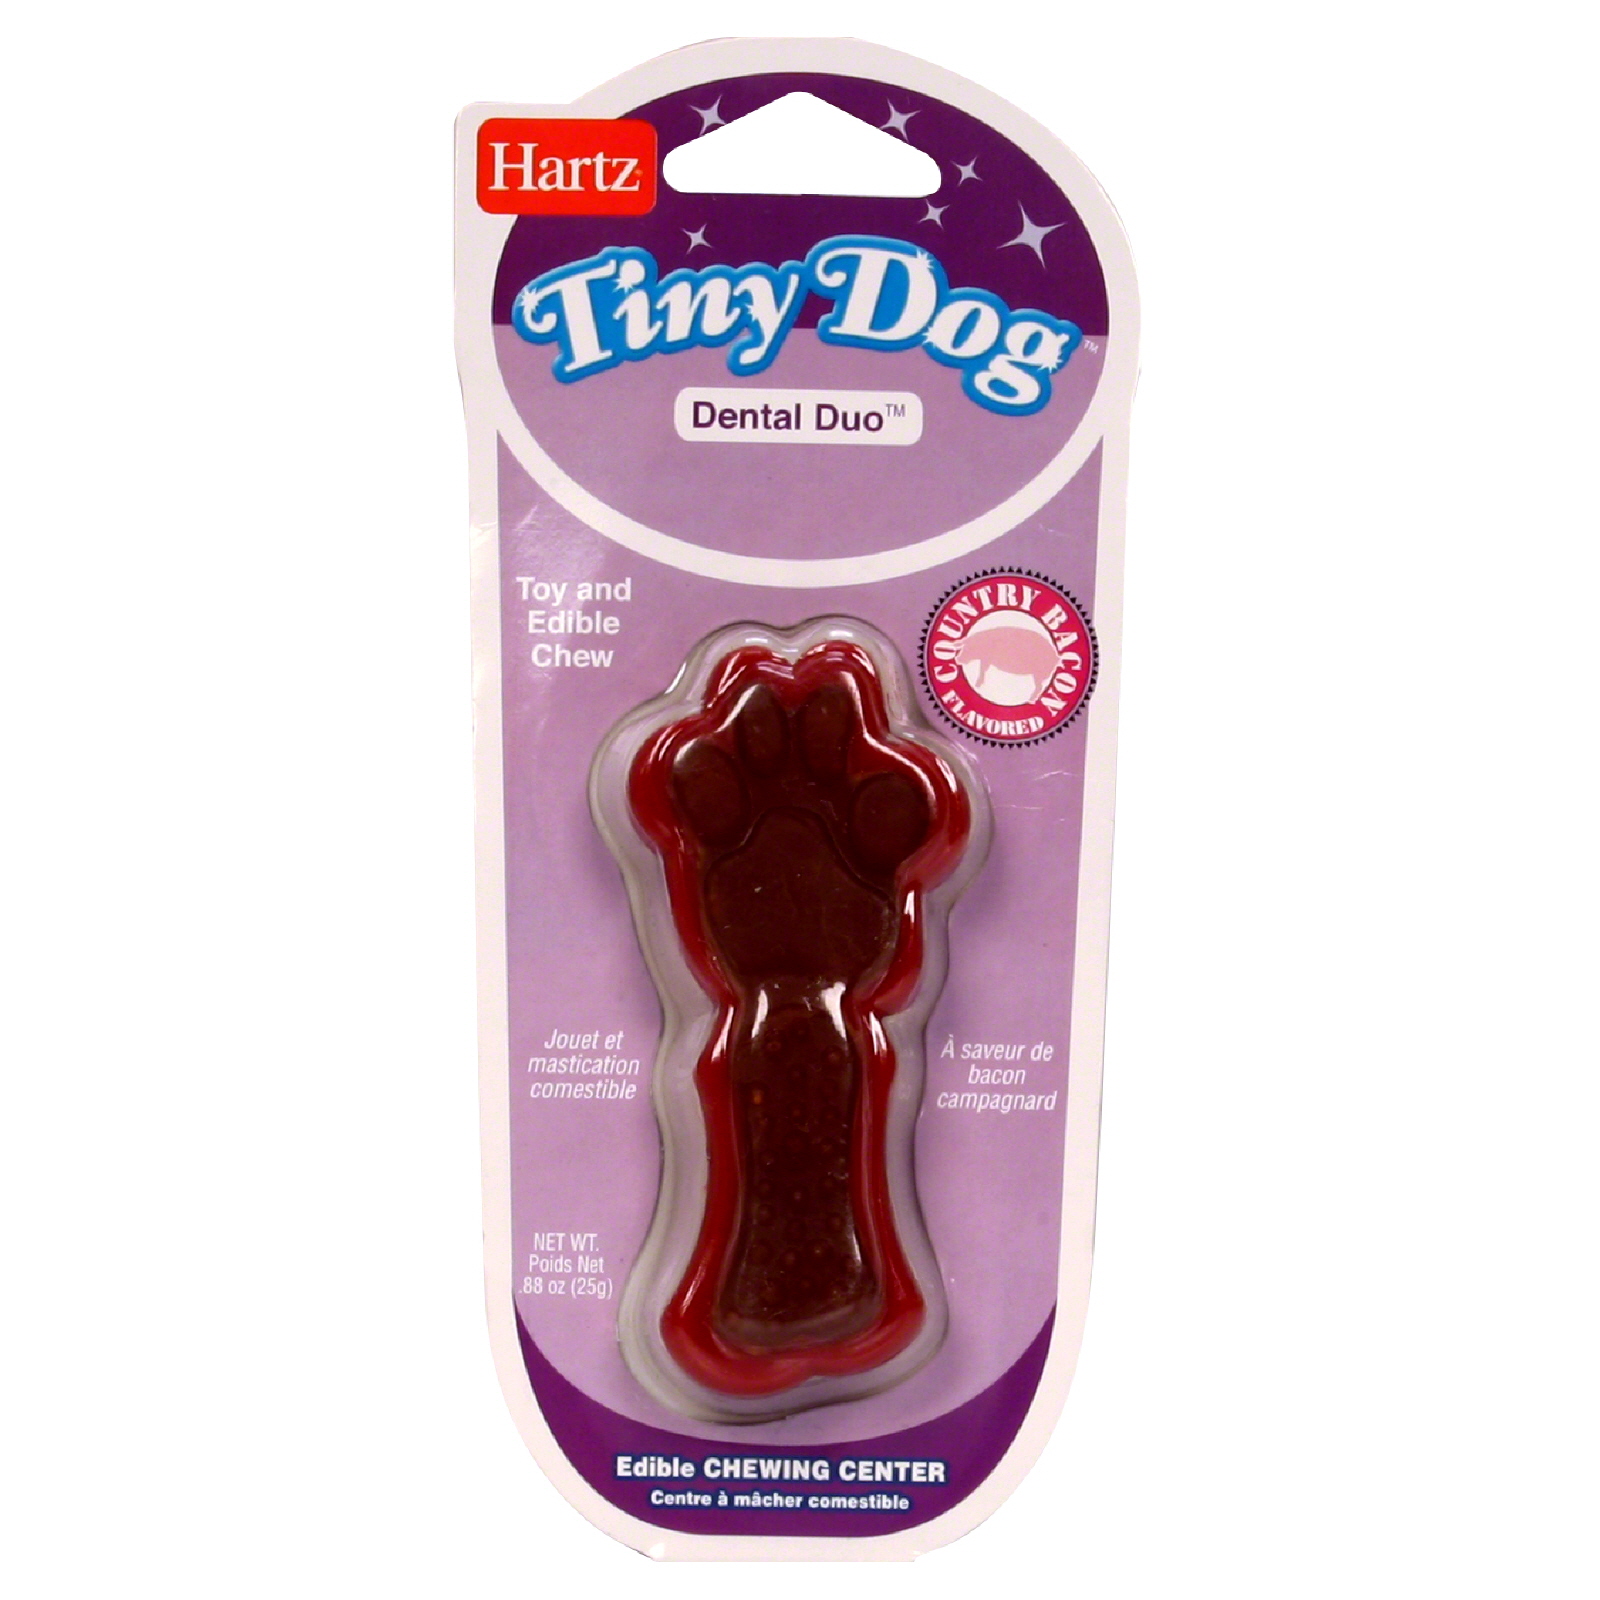 Hartz Tiny Dog Toy and Edible Chew, Dental Duo, Country Bacon Flavored, 1 toy